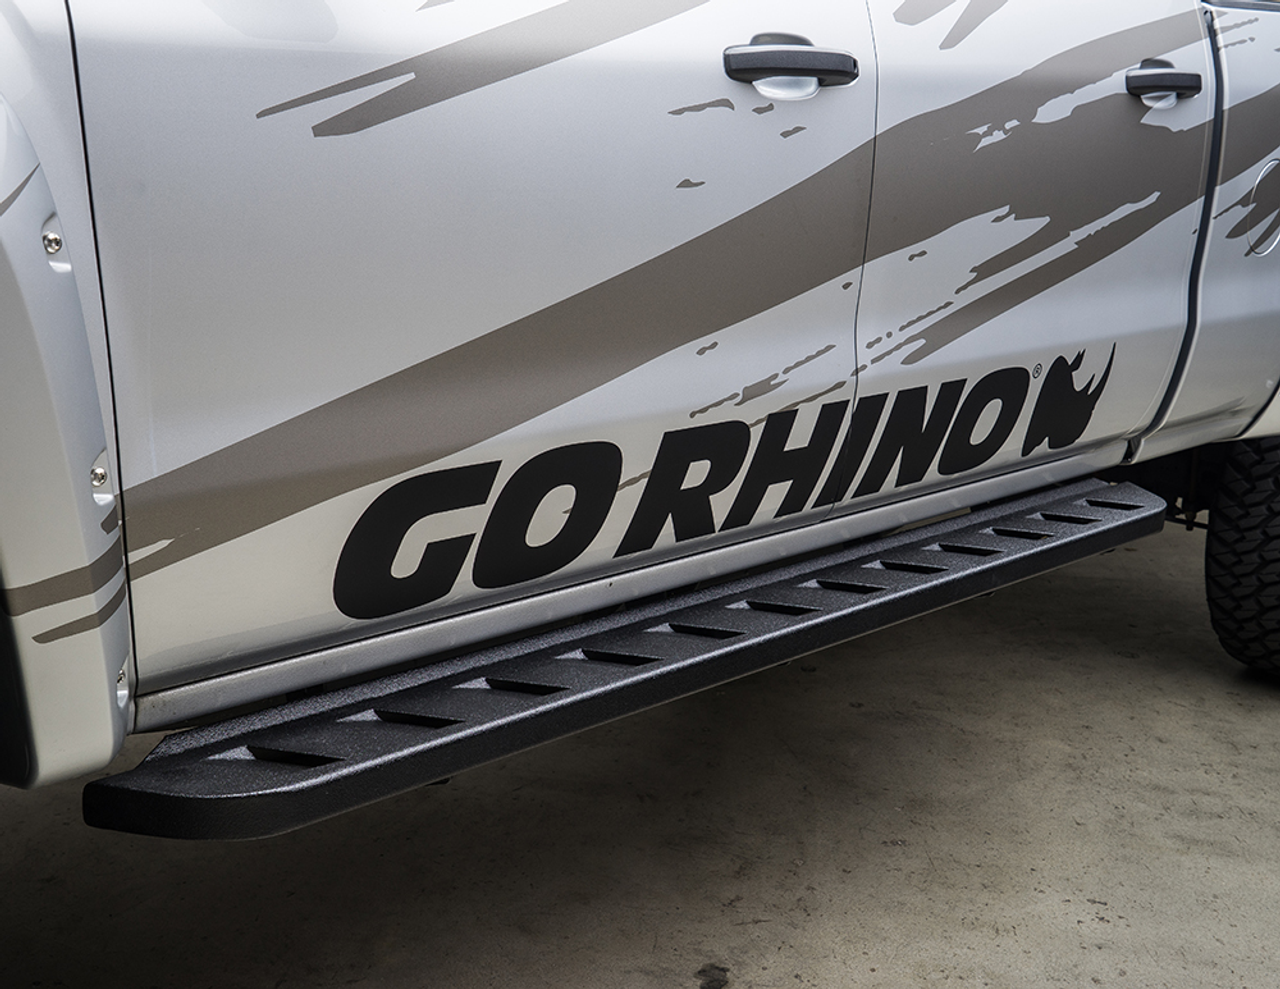 Go Rhino 6341778020PC Ford, F-250, F-350, 2017 - 2021, RB10 Running boards - Complete Kit:  2 pair RB10 Drop Steps, Galvanized Steel, Textured black, 630080PC RB10 + 6941555 RB Brackets + (2) 69420000PC Drop Down Step